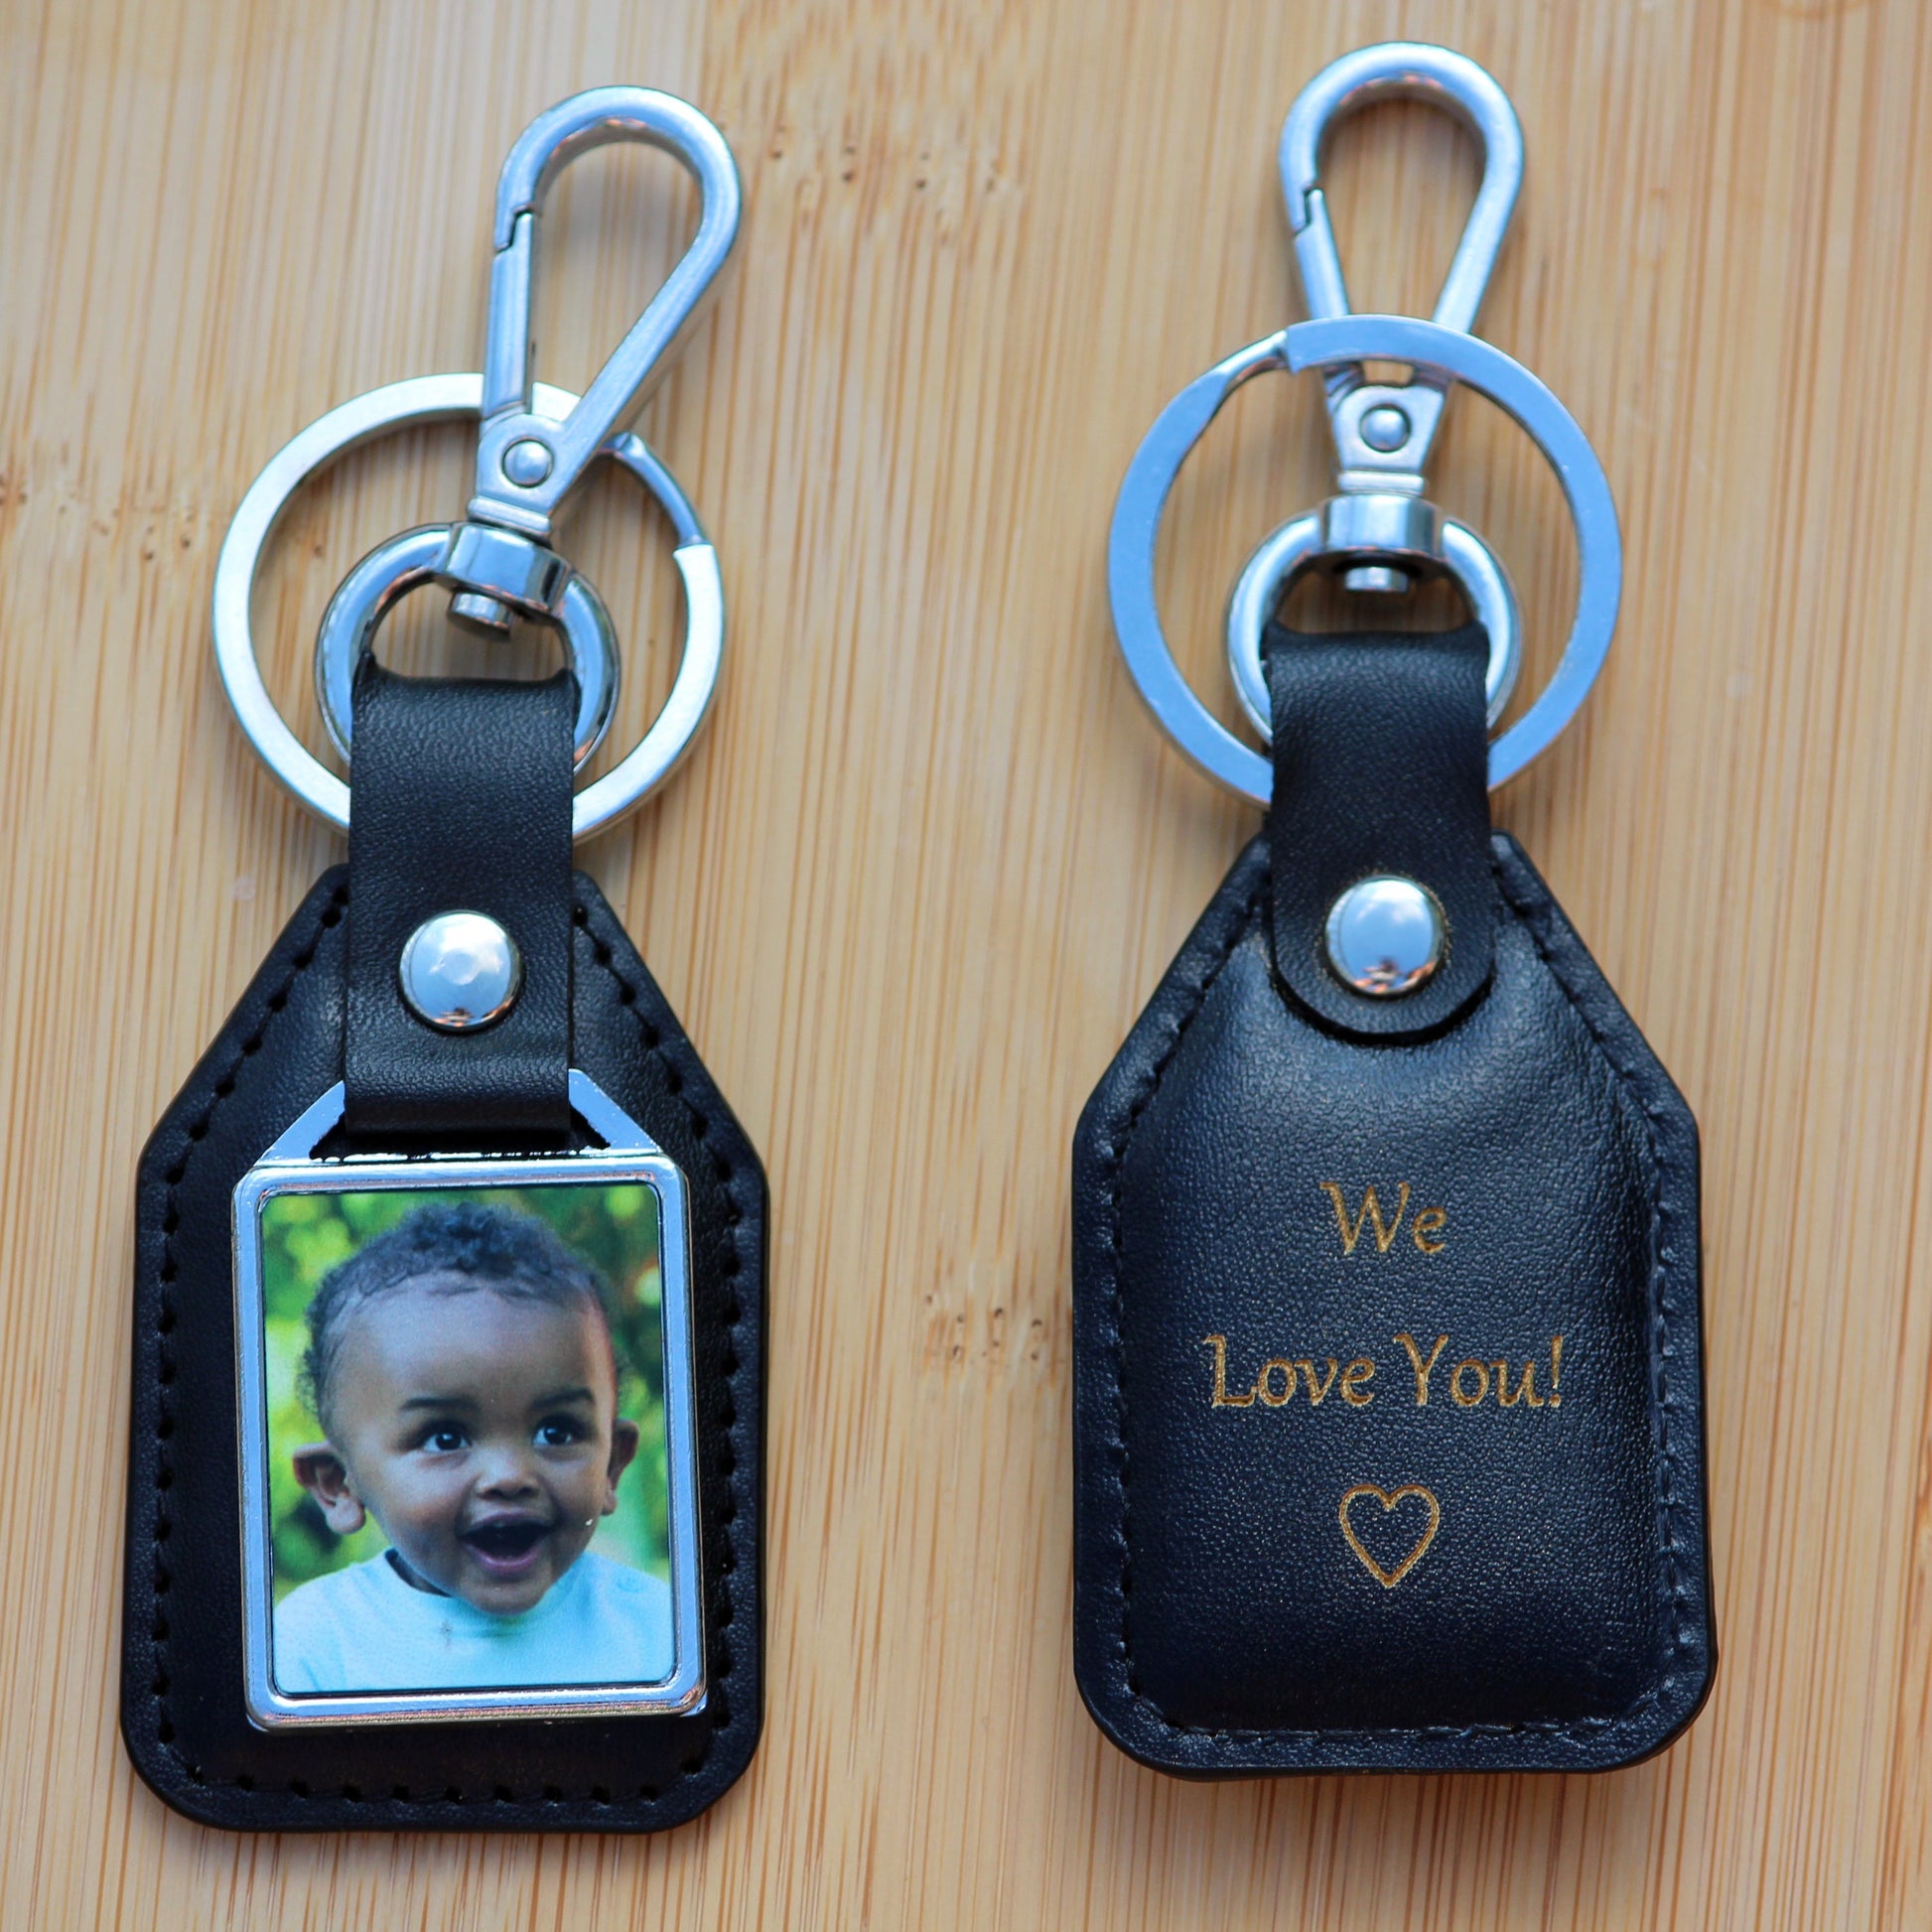 Photo Key Ring, Personalized Keychains, Handmade Gift, Drive Safe Key Holder Gift - Birthday, Wedding, Mothers Day, Fathers Day Gift